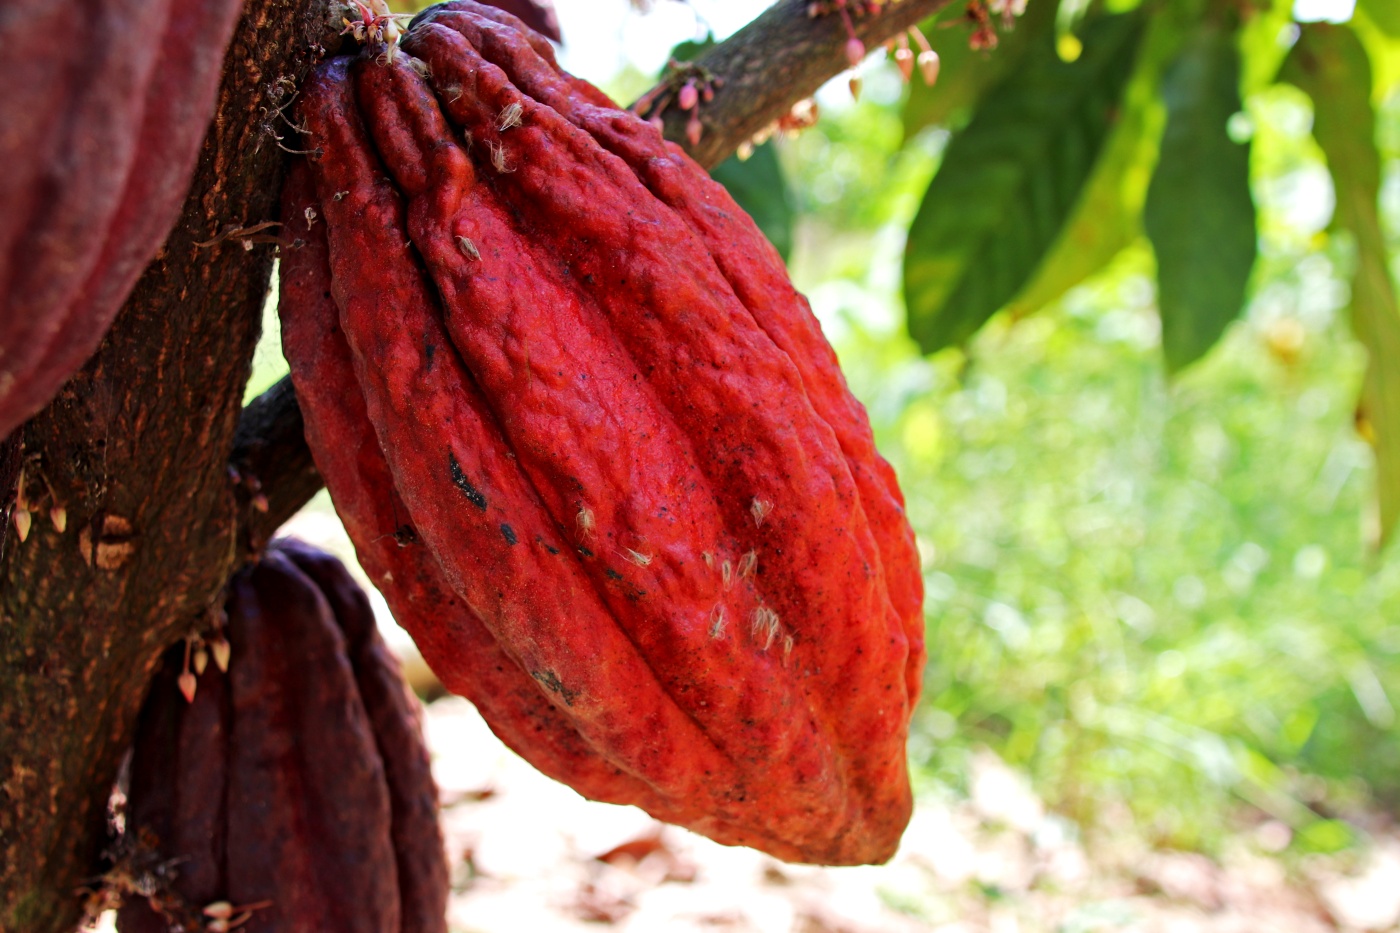 Brazil and Peru trade expertise on cocoa agroforestry in first-ever exchange